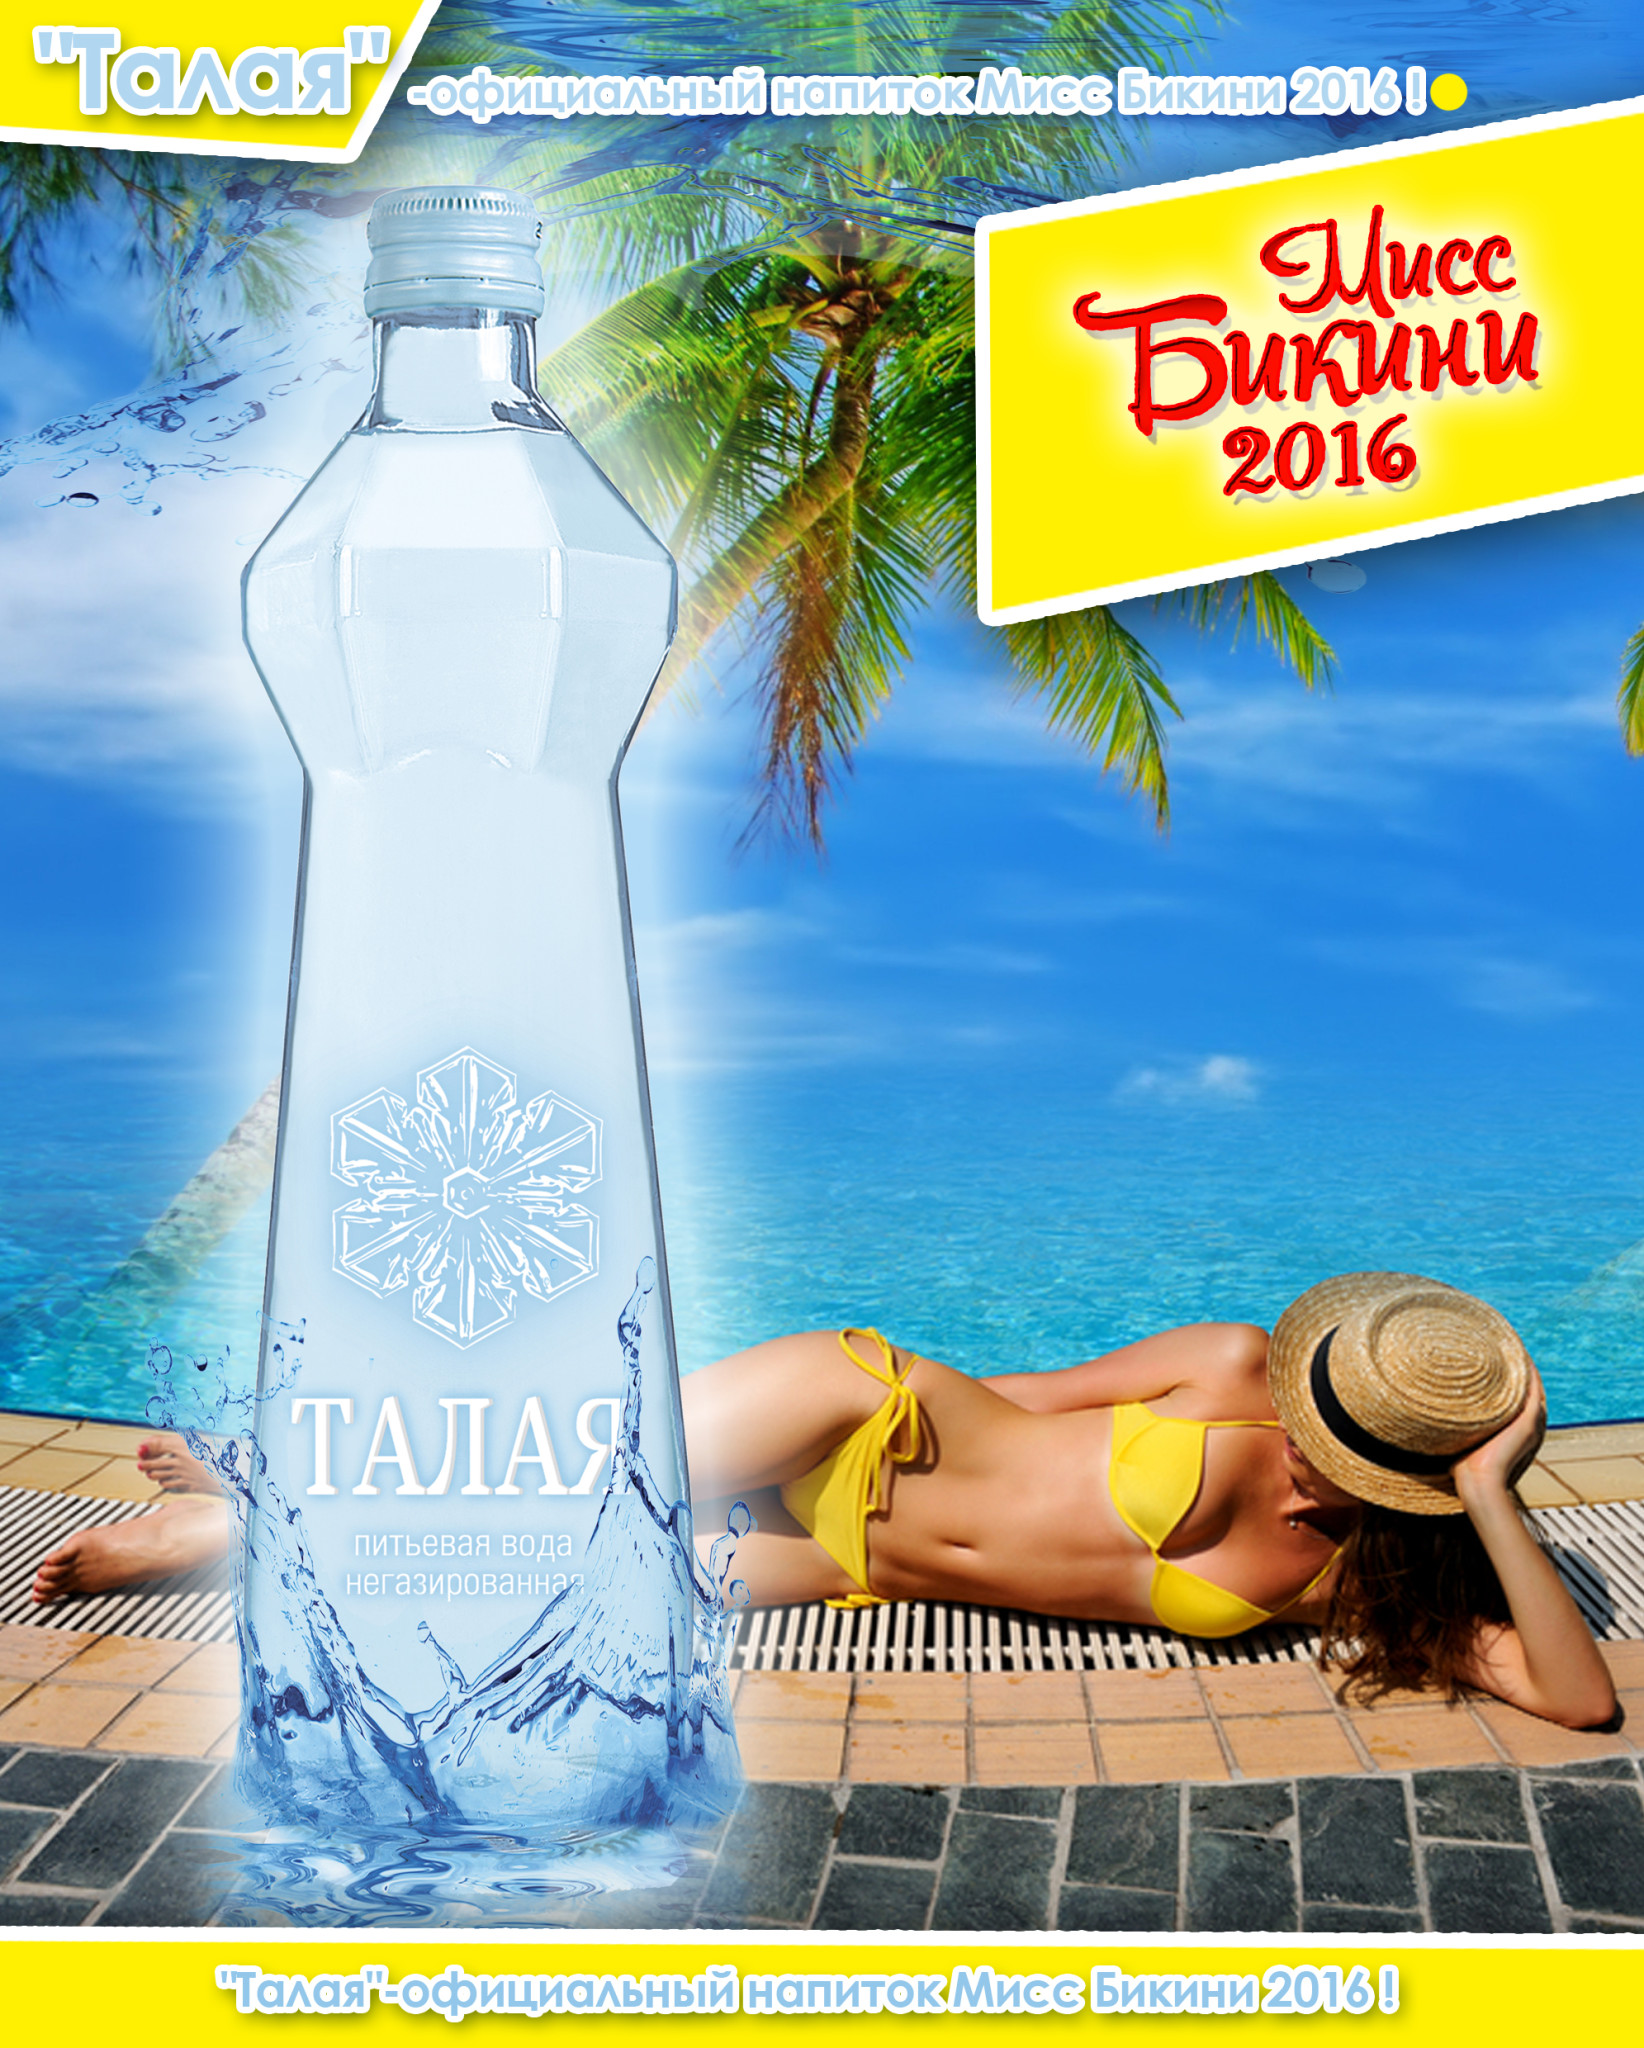 Drinking water "Talaya" became the official drink of "Miss Bikini 2016"